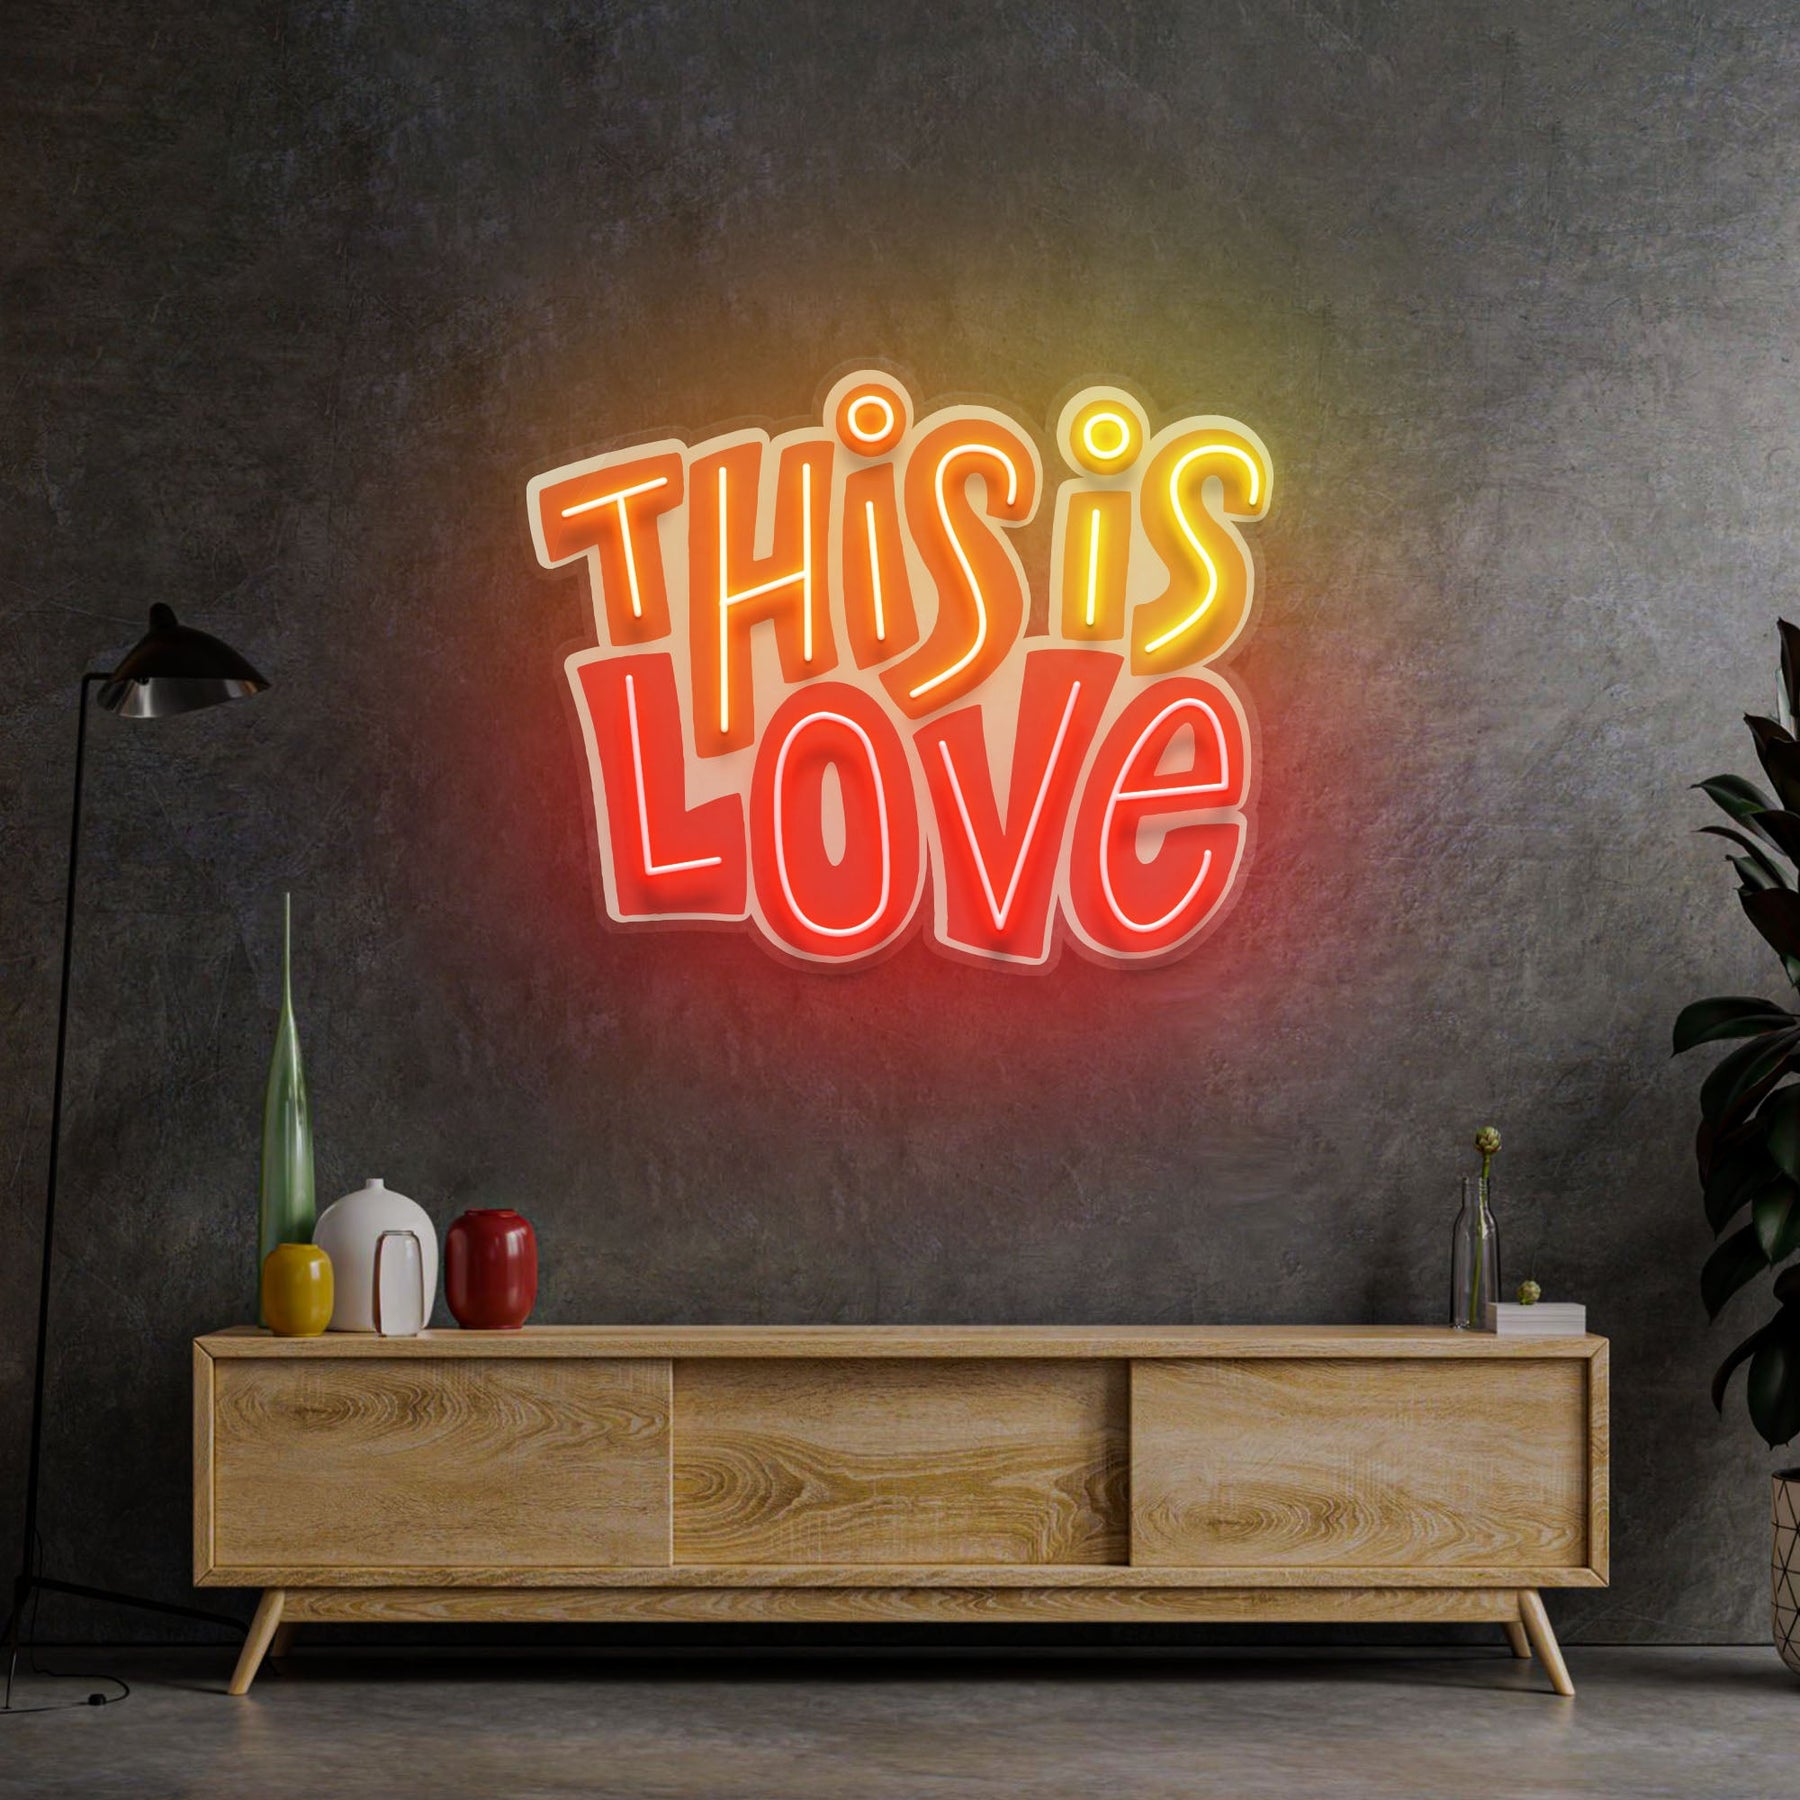 This Is Love LED Neon Sign Light Pop Art